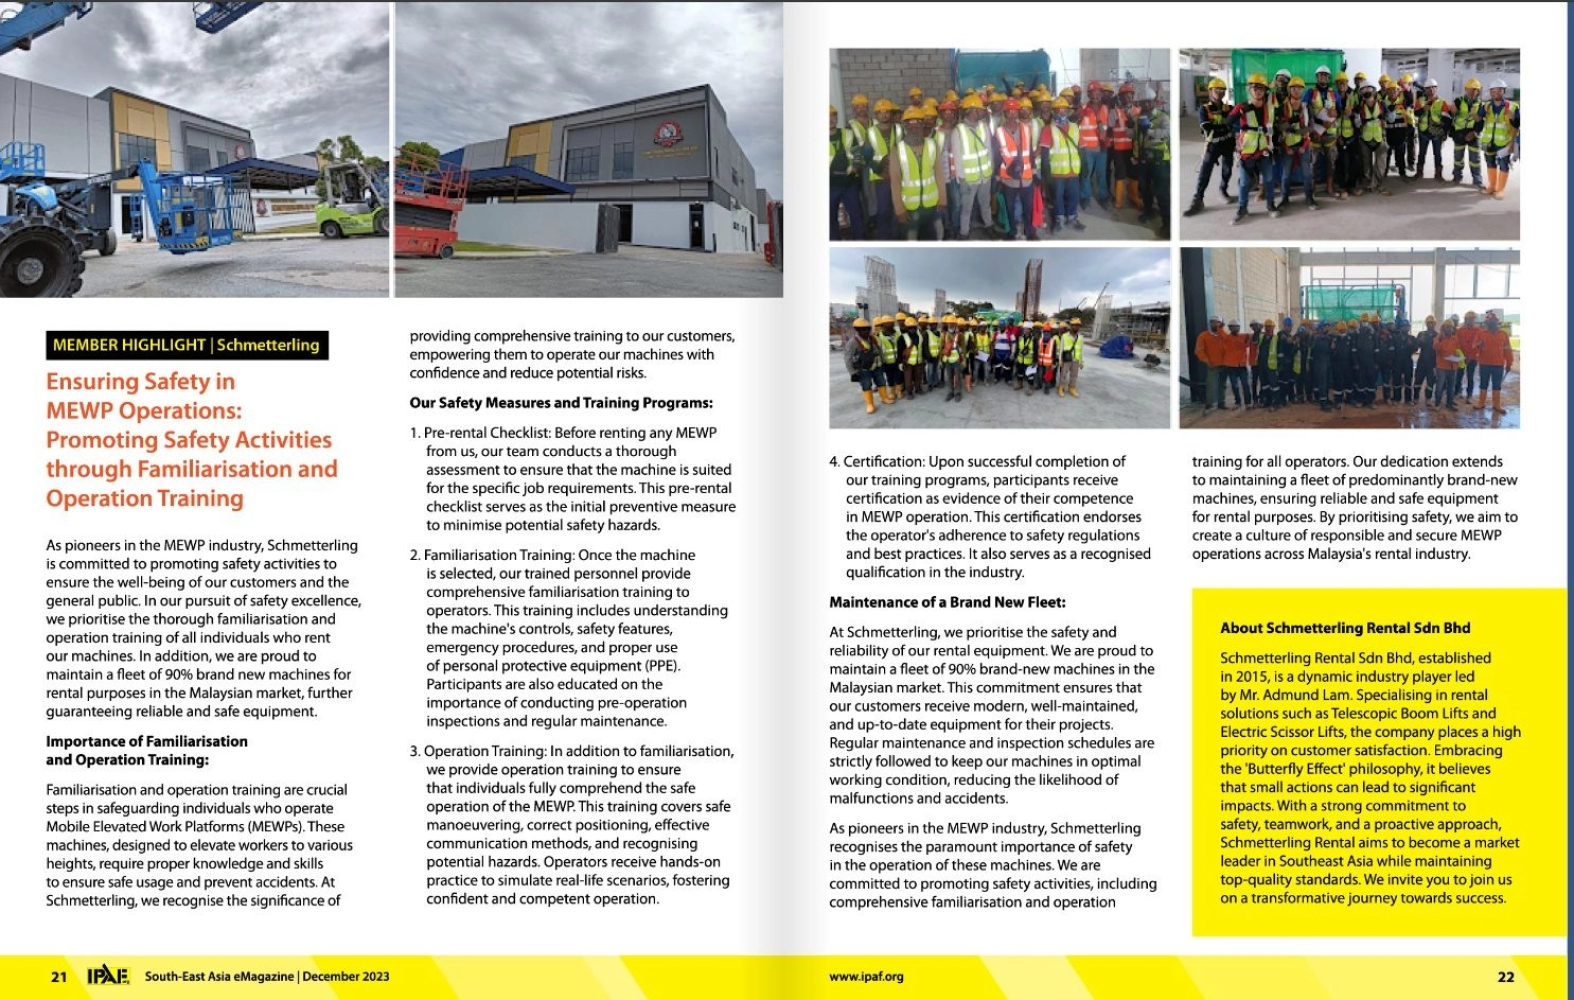 IPAF Member Highlight in South-East Asia eMagazine- Schmetterling Group